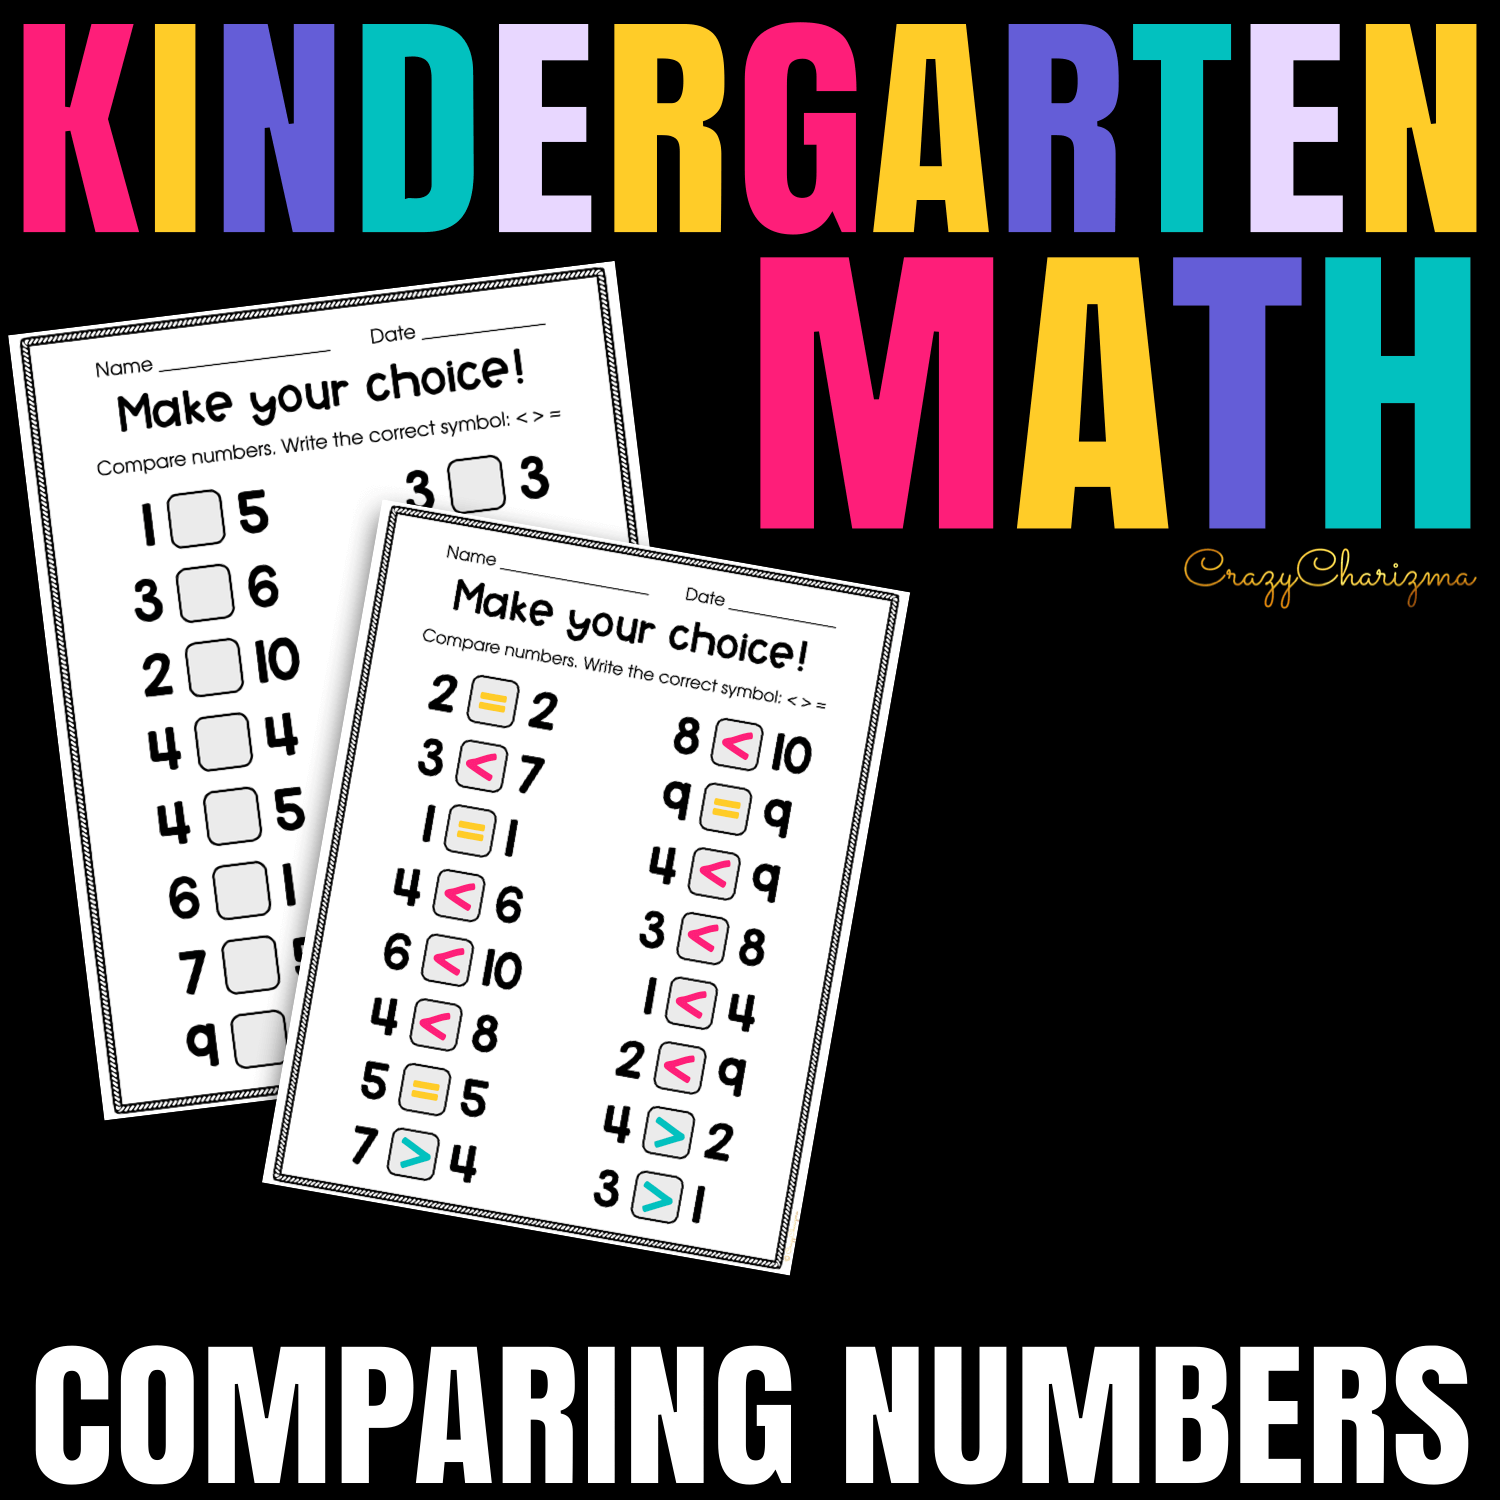 Practice comparing numbers to 10 with these worksheets. Kids will decide what symbol to use and whether numbers are greater than, less than, or equal to each other.